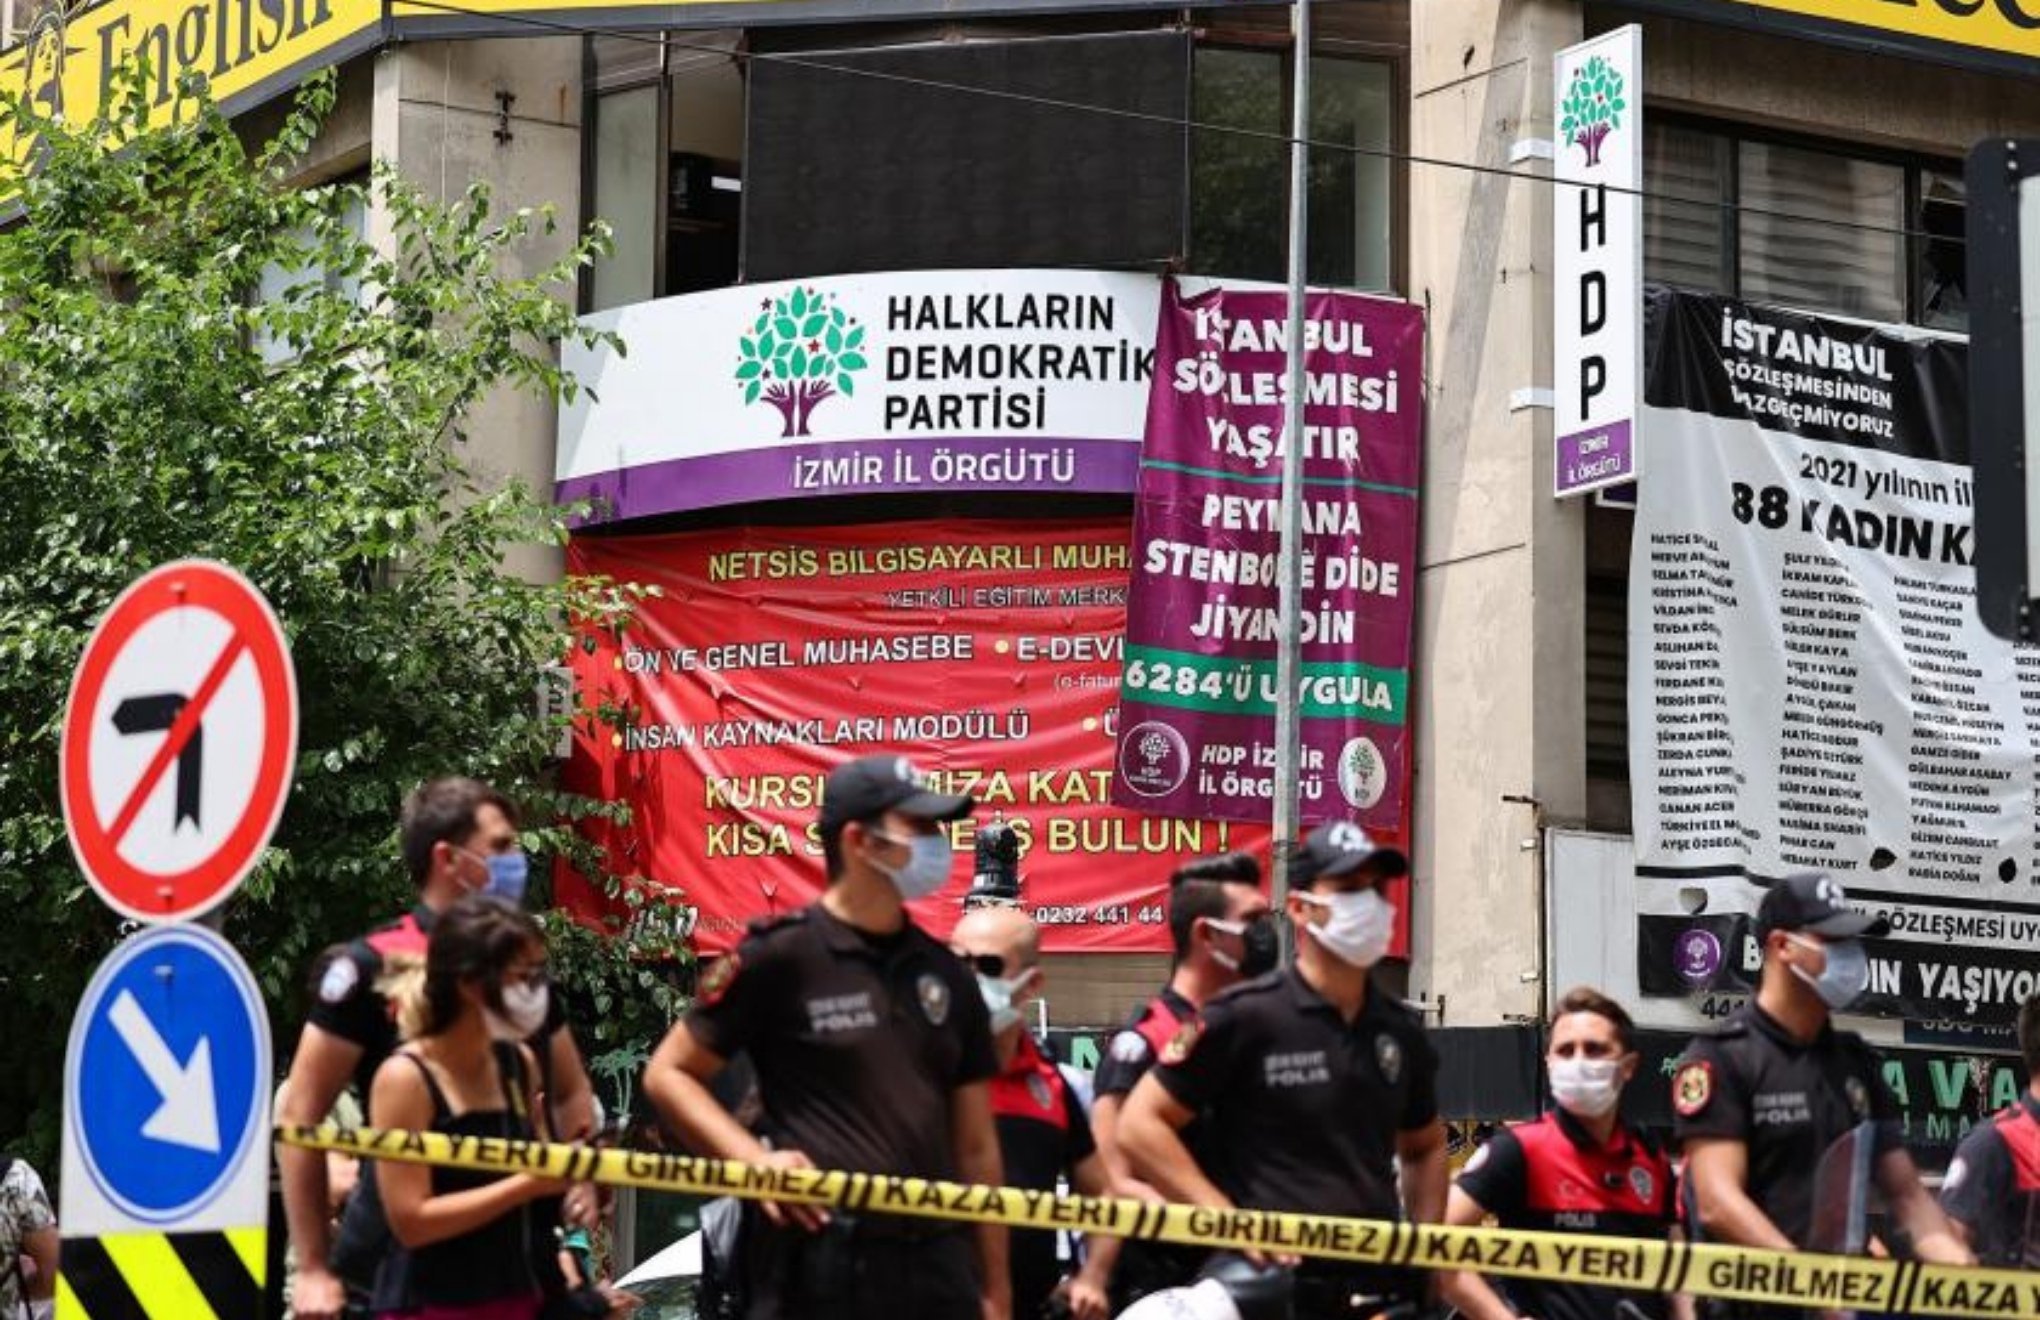 HDP asks Minister Soylu 20 questions about the deadly İzmir attack